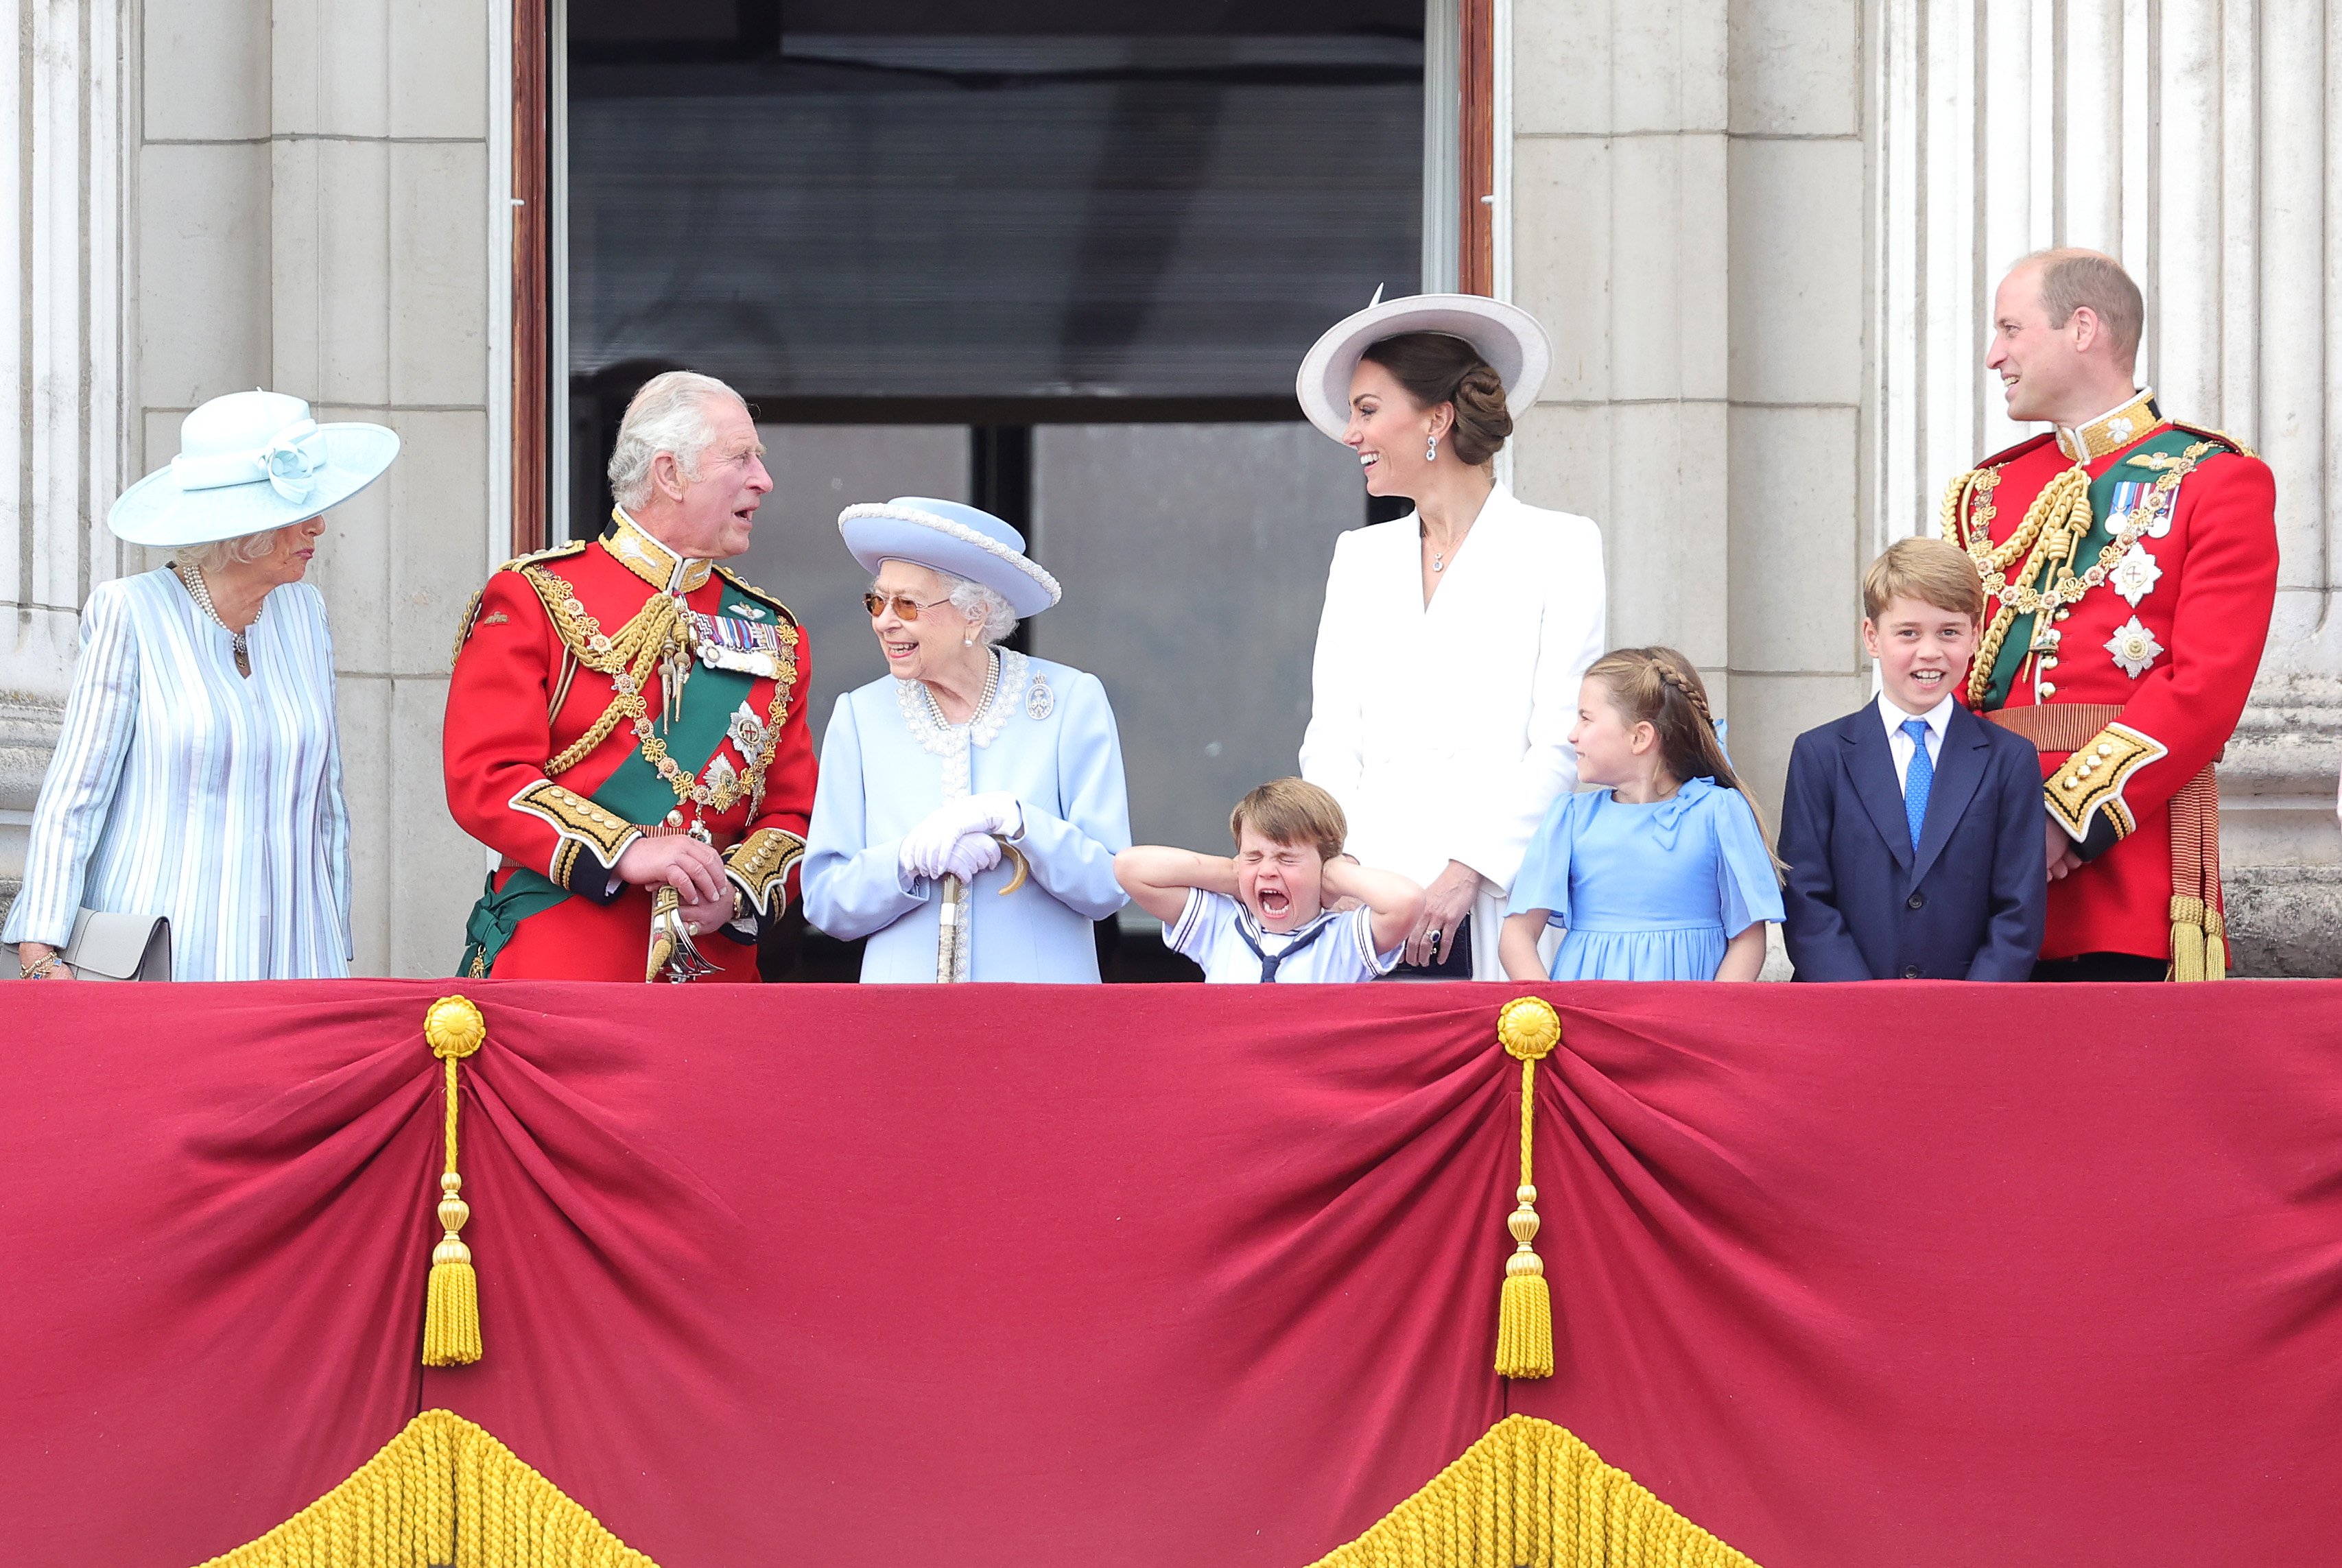 Prince Louis covers his ears while standing with other royal family members on the balcony of Buckingham Palace during Trooping the Colour.